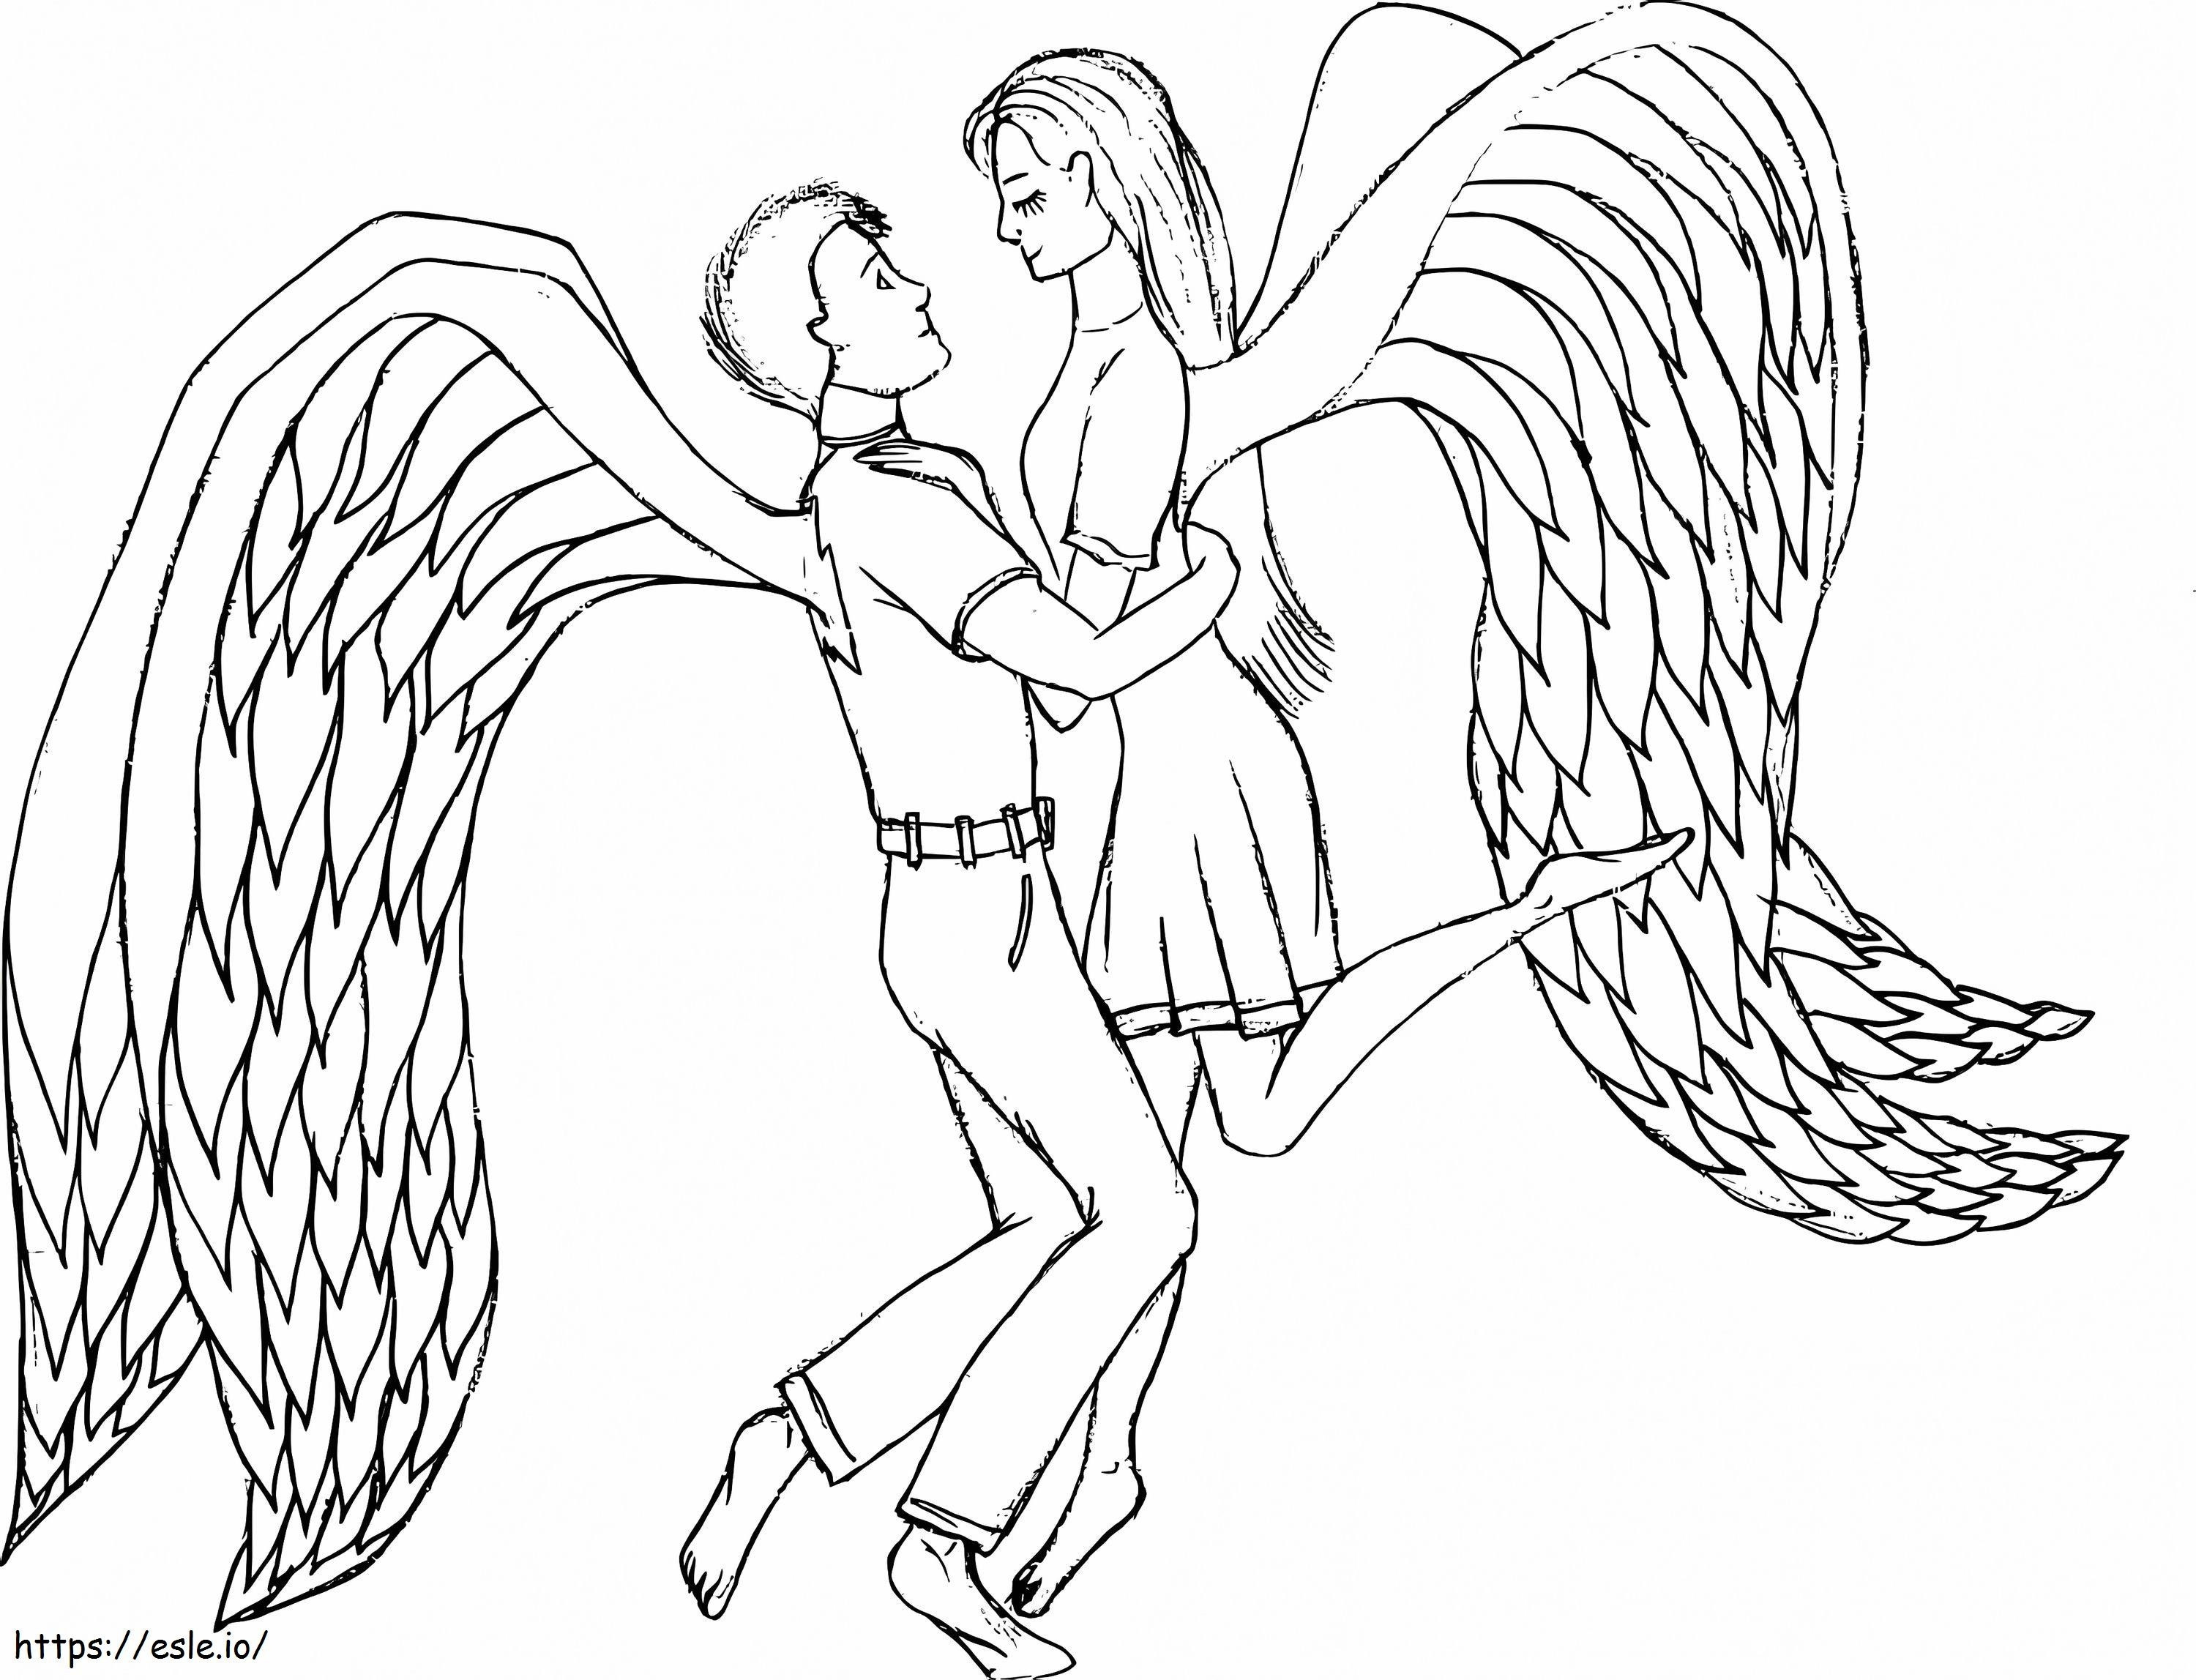 Love Of Angels coloring page